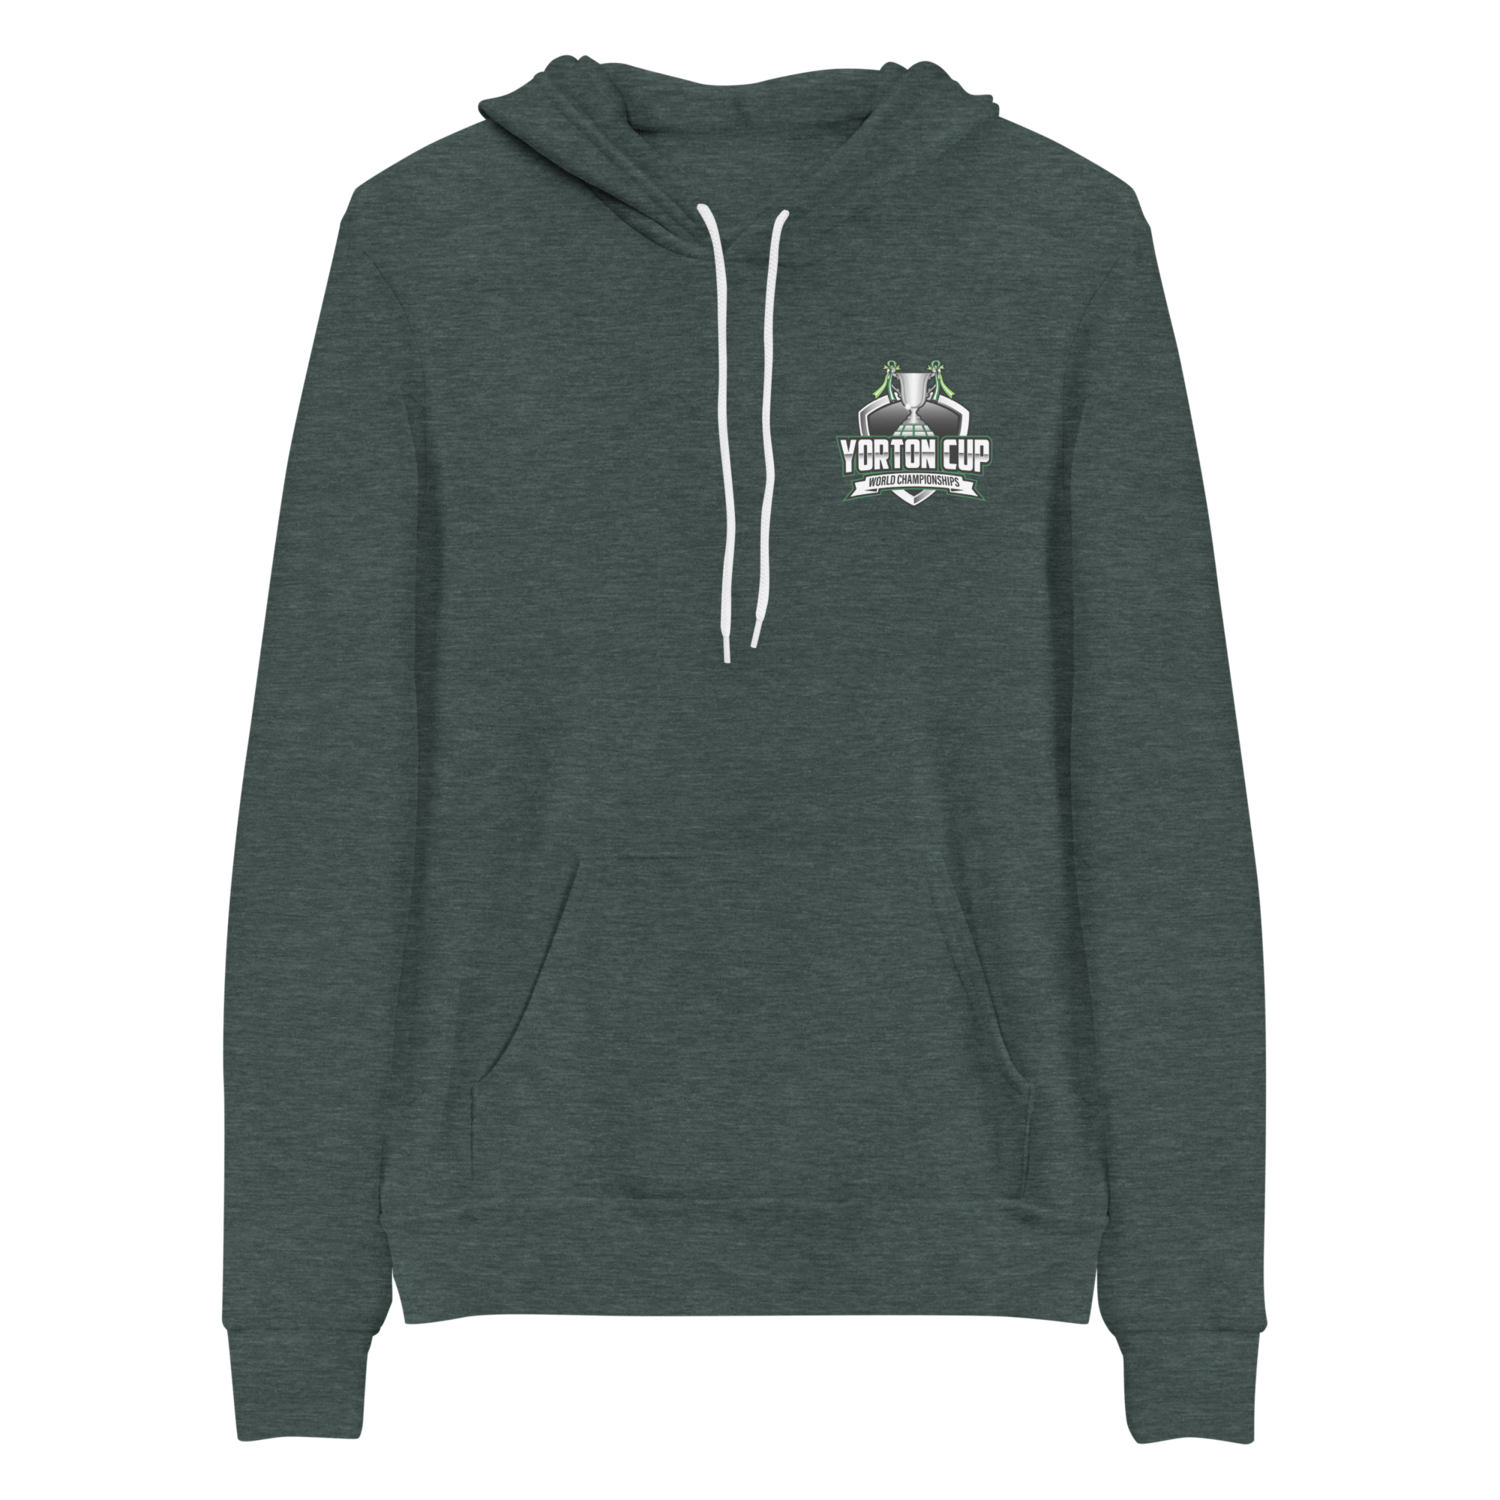 Yorton Cup - Heavy Blend Pullover Hoodie